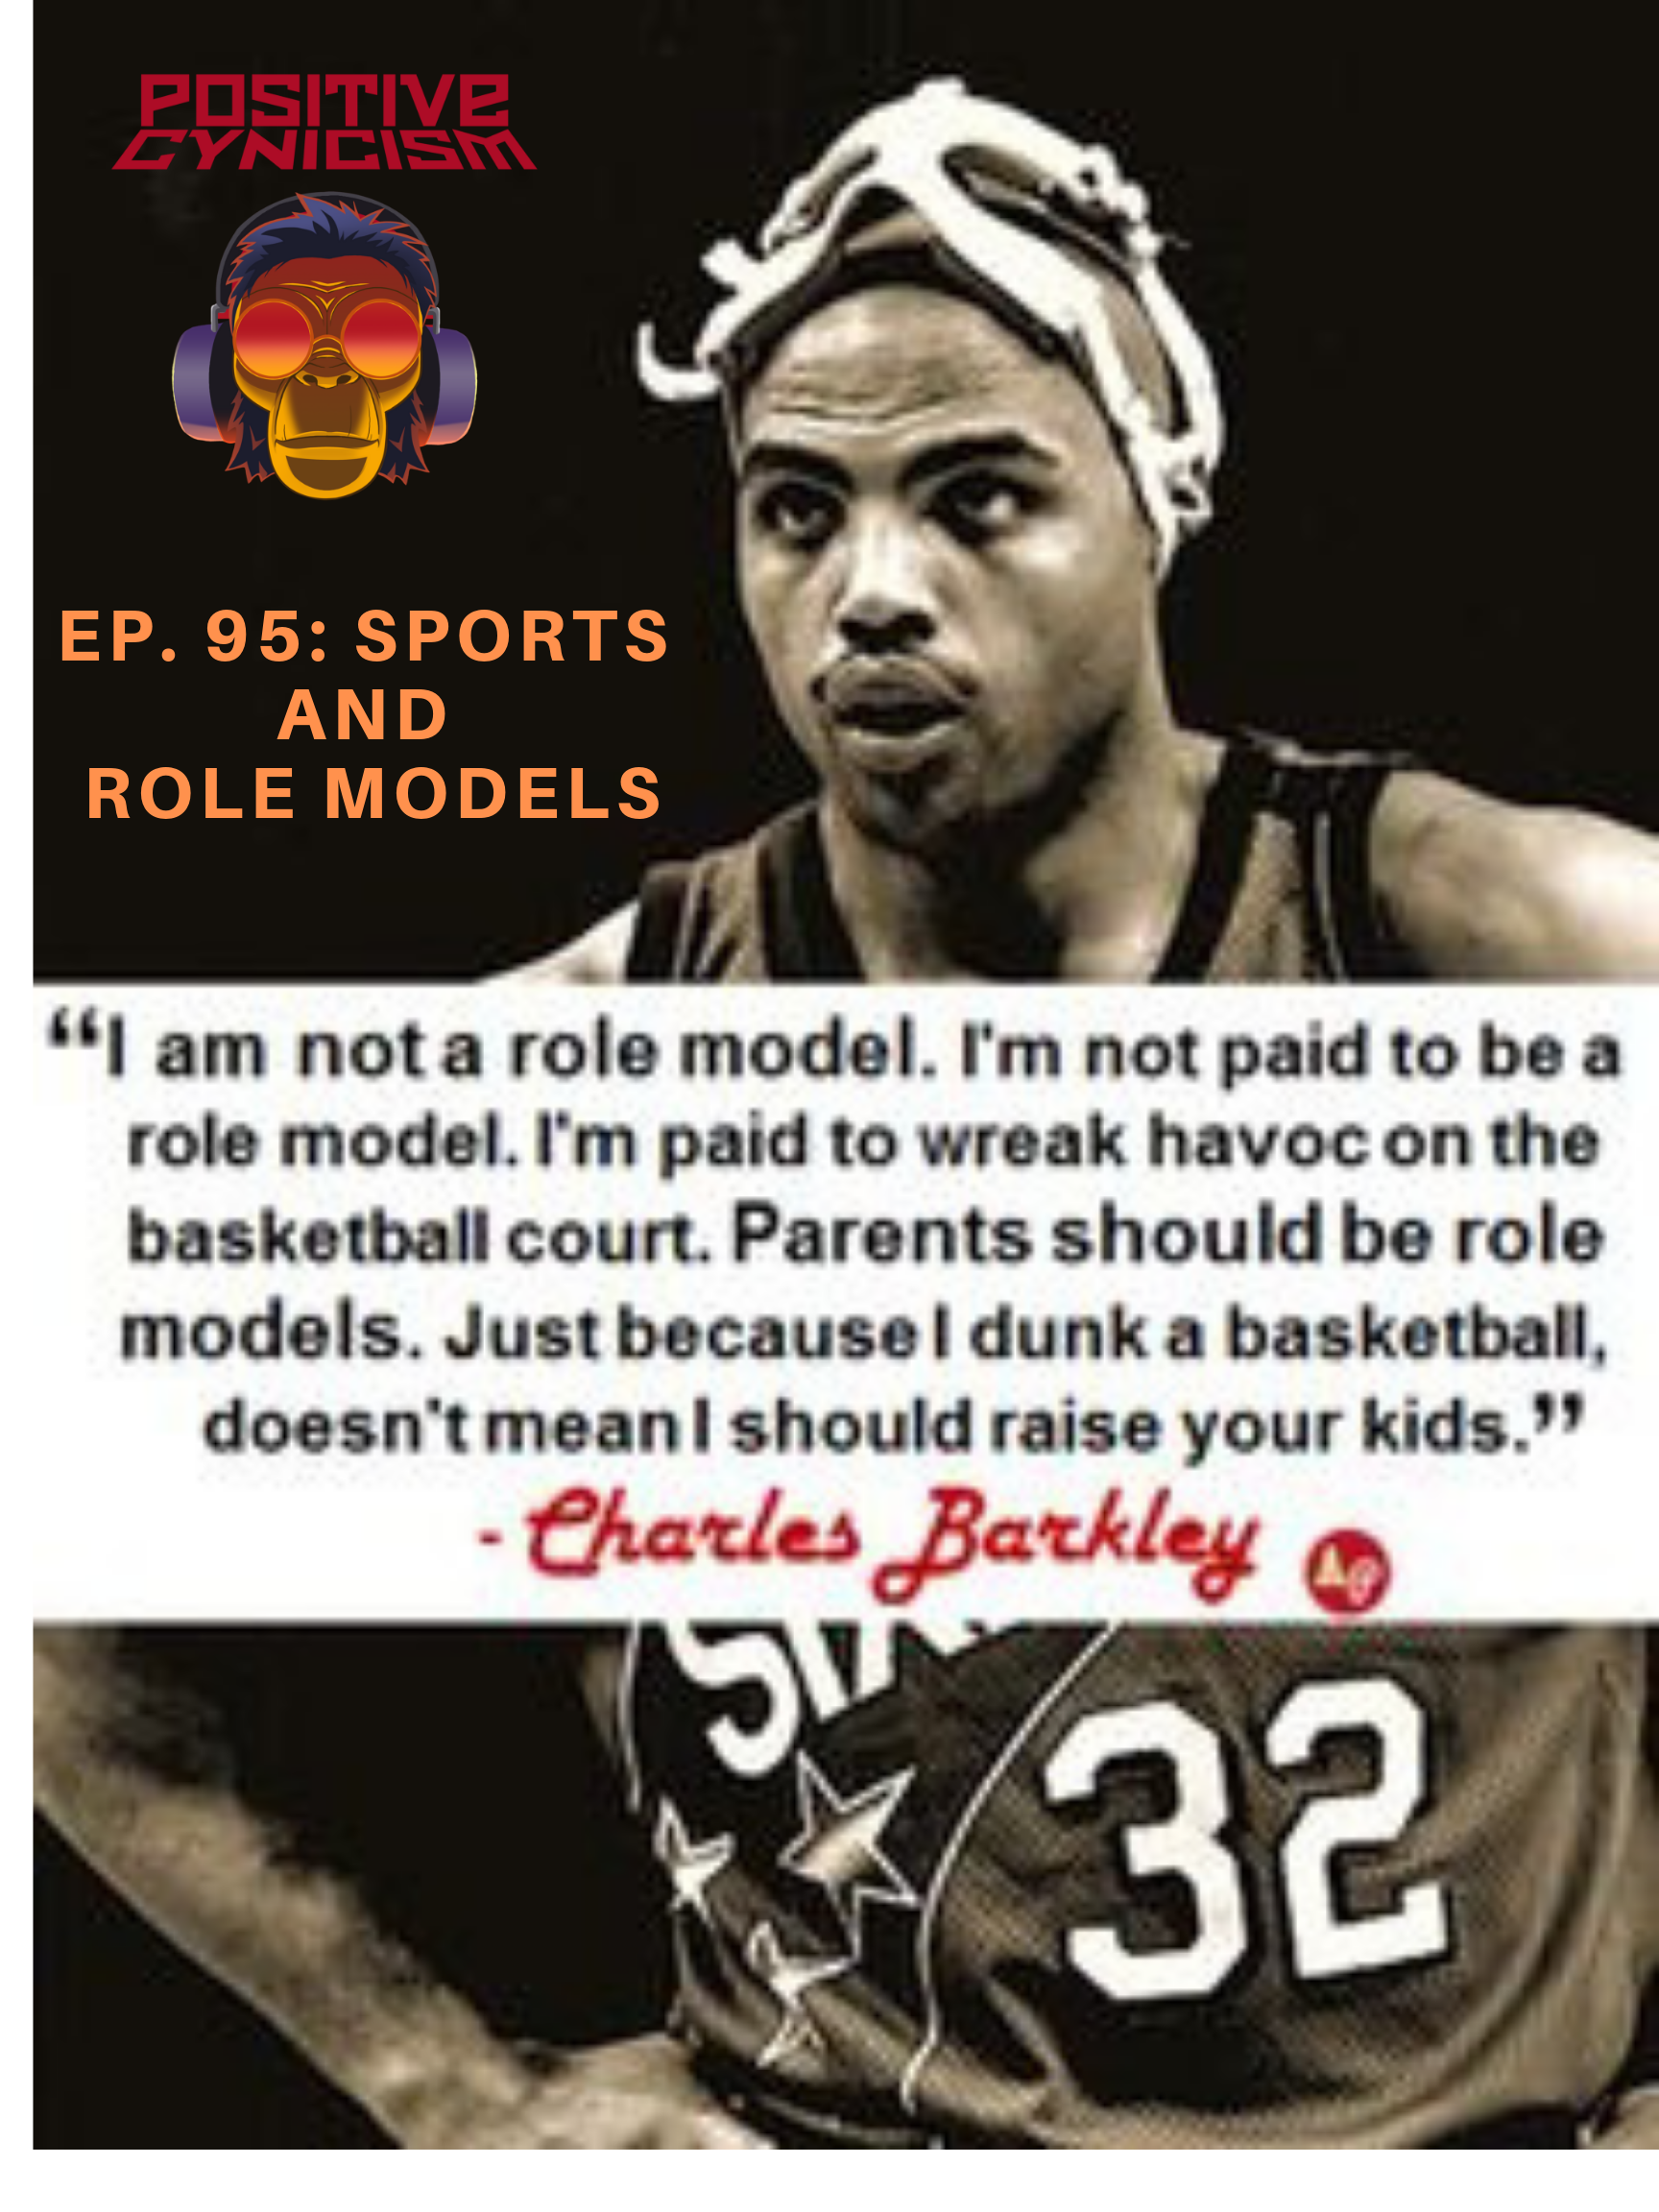 Positive Cynicism EP. 95: Sports and Role Models